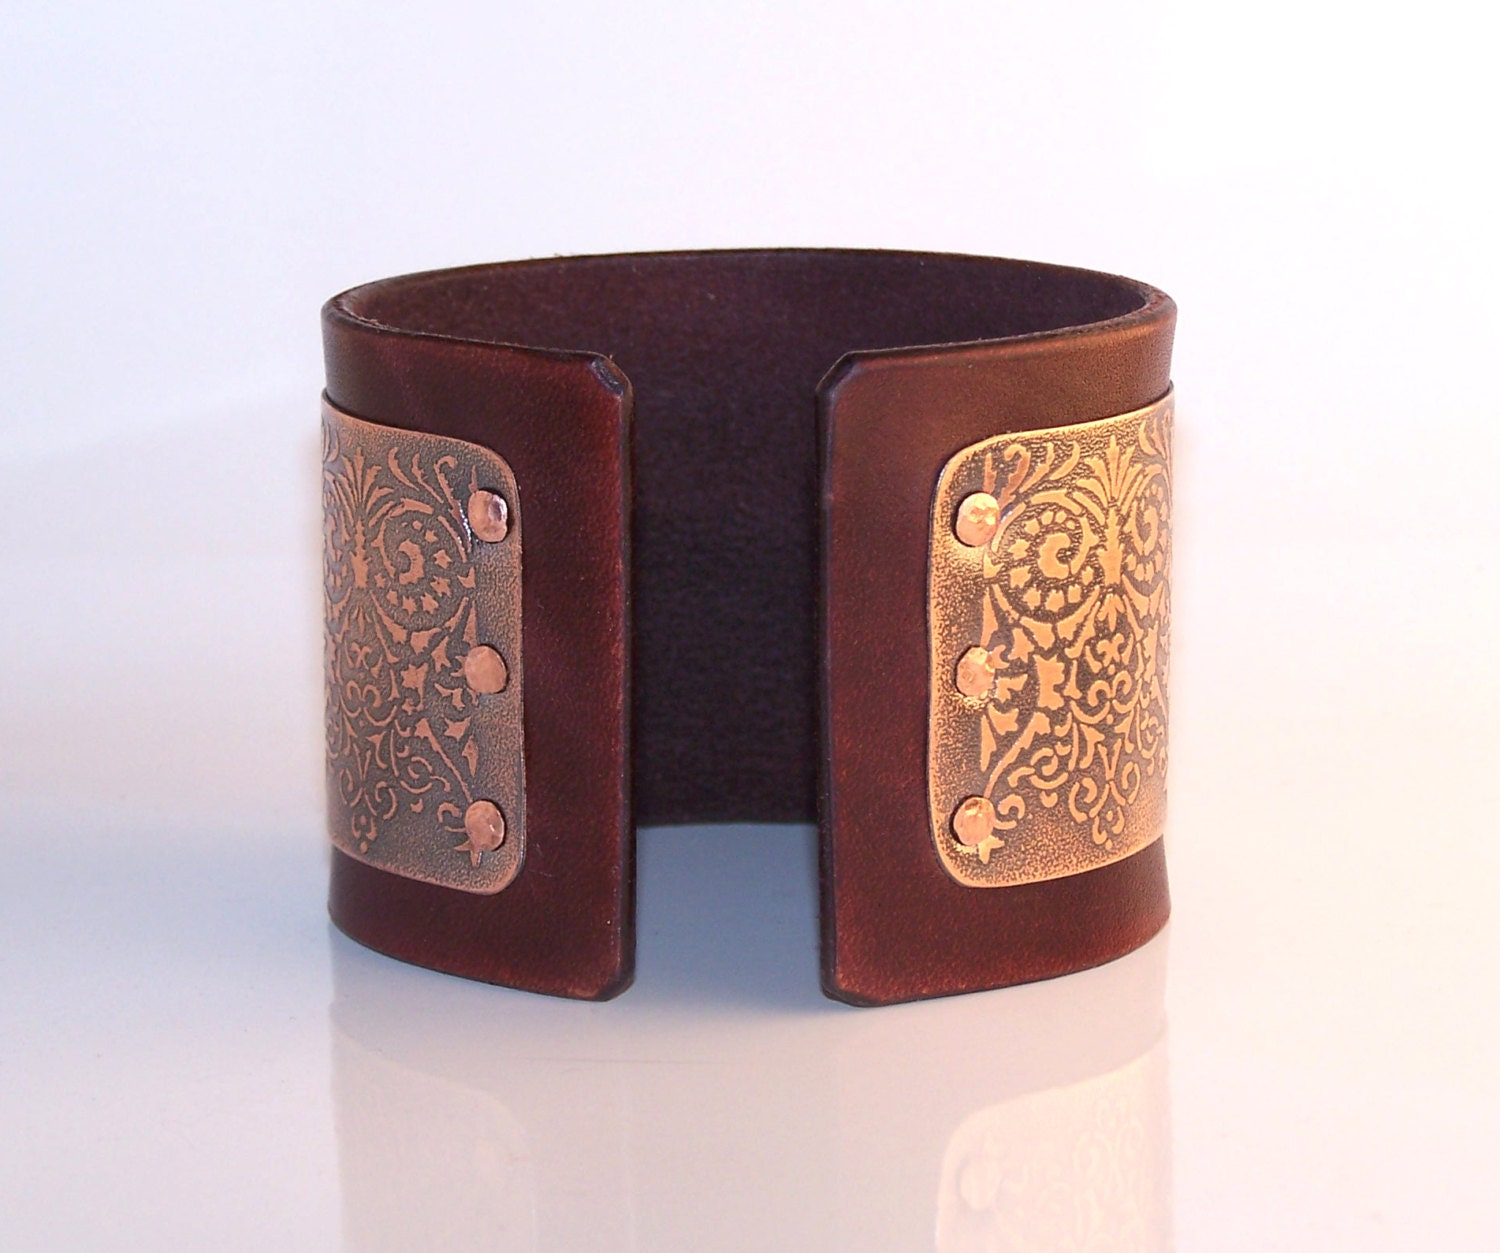 Beautiful leather and etched copper women cuff by byCopperfield